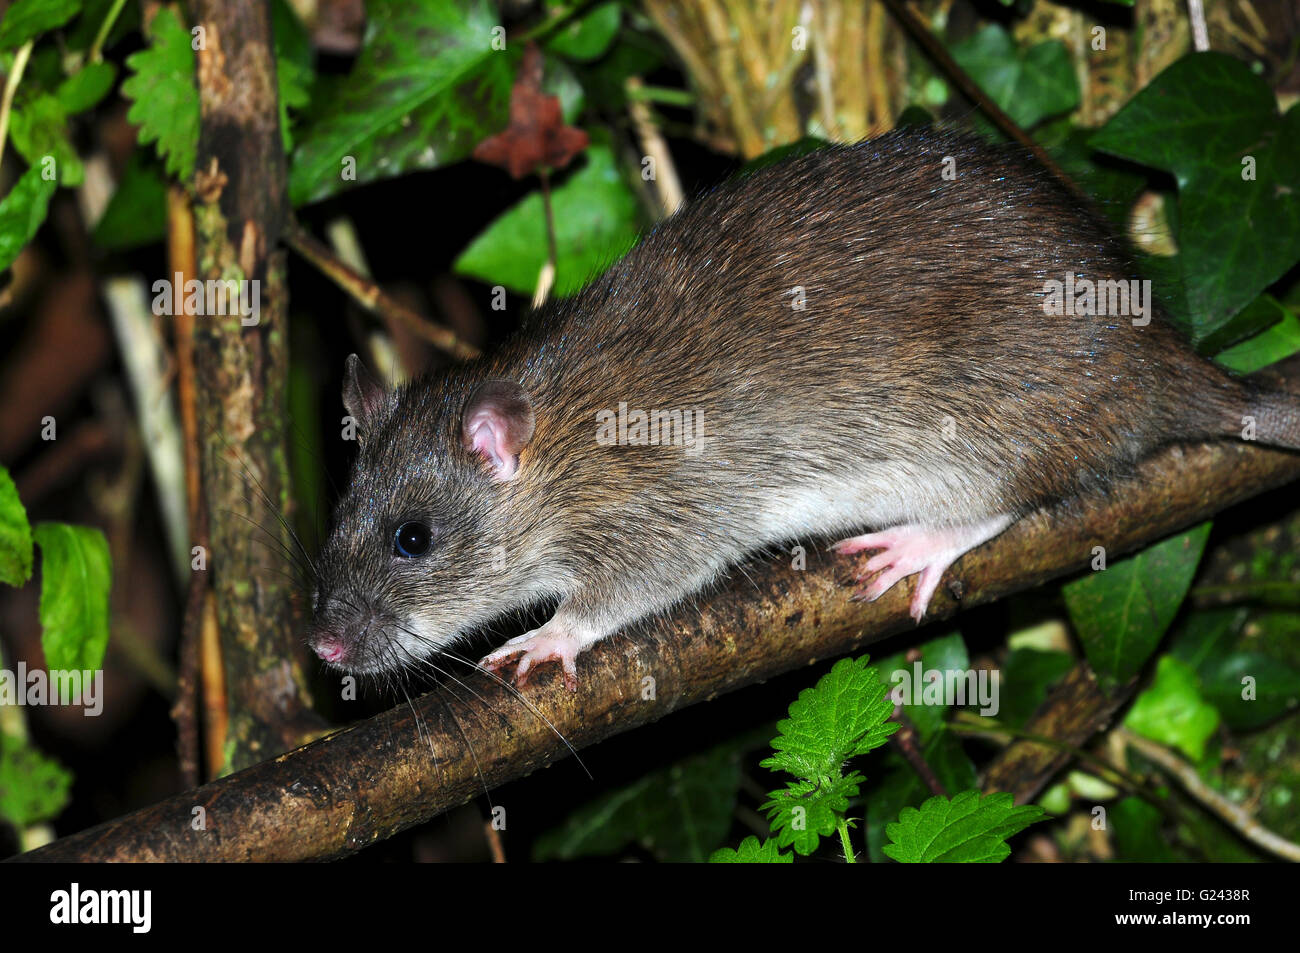 A common brown rat in the hedgerow UK Stock Photo